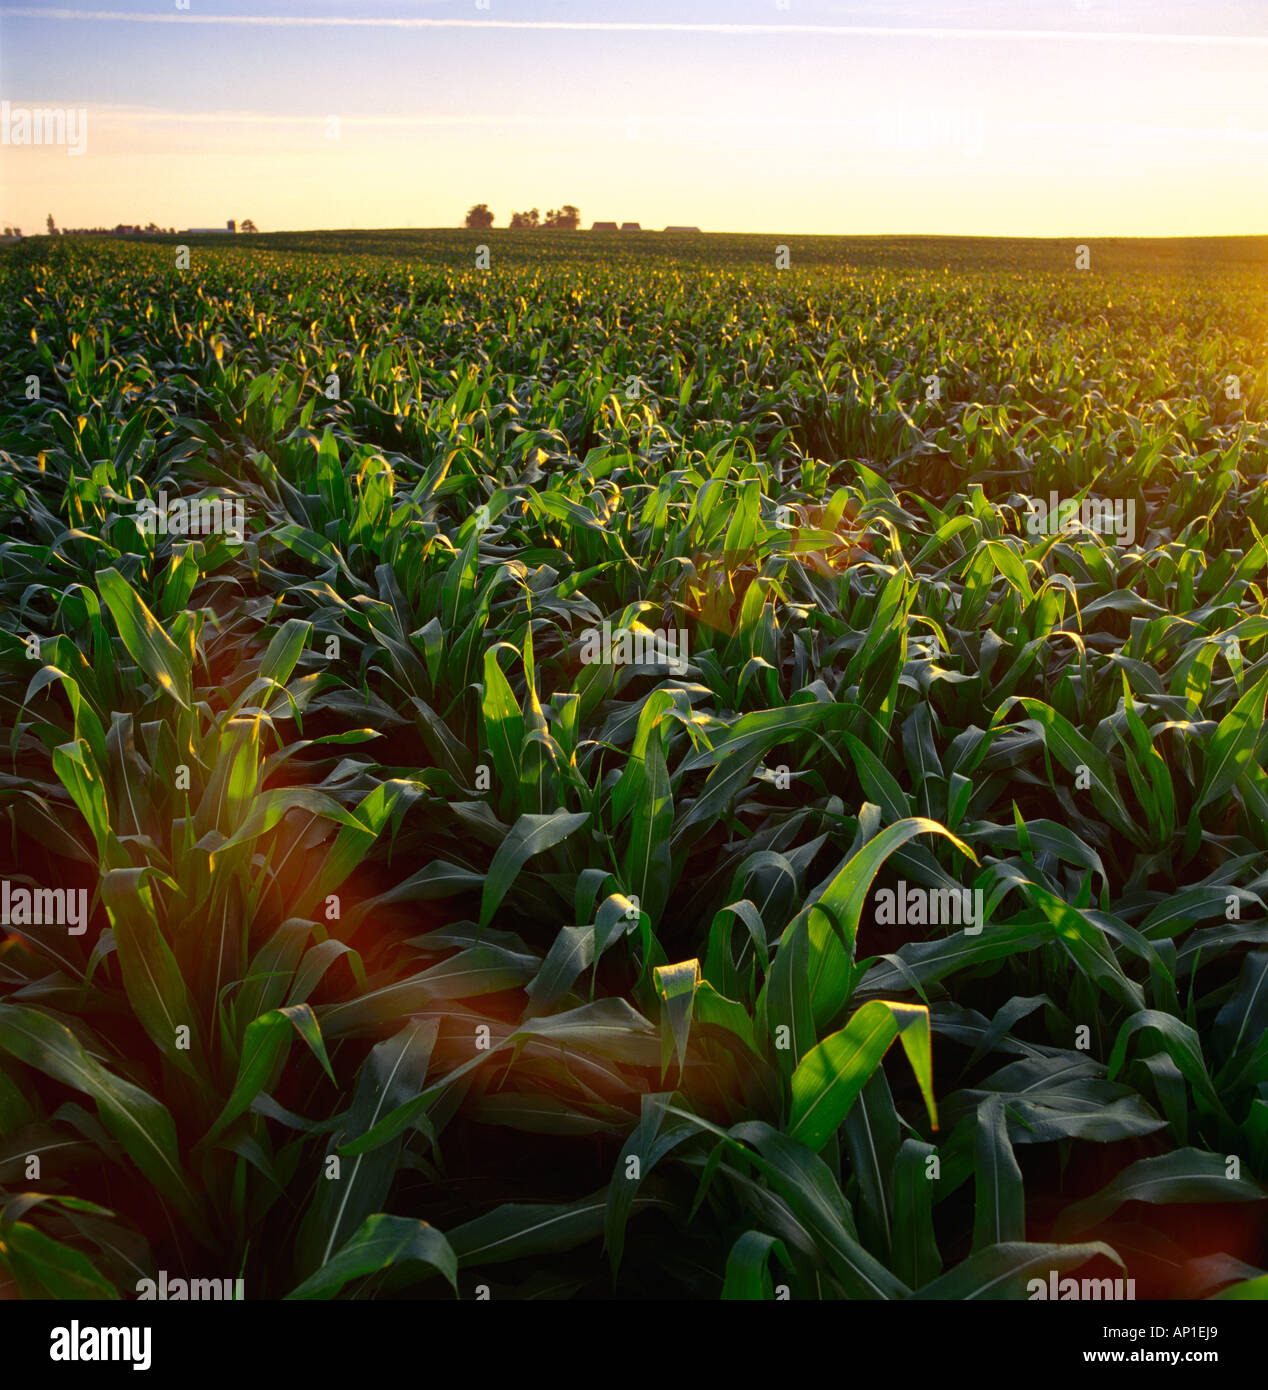 Field of mid growth pre tassel stage grain corn at sunset with a farmstead in the distance / near Marshalltown, Iowa, USA. Stock Photo